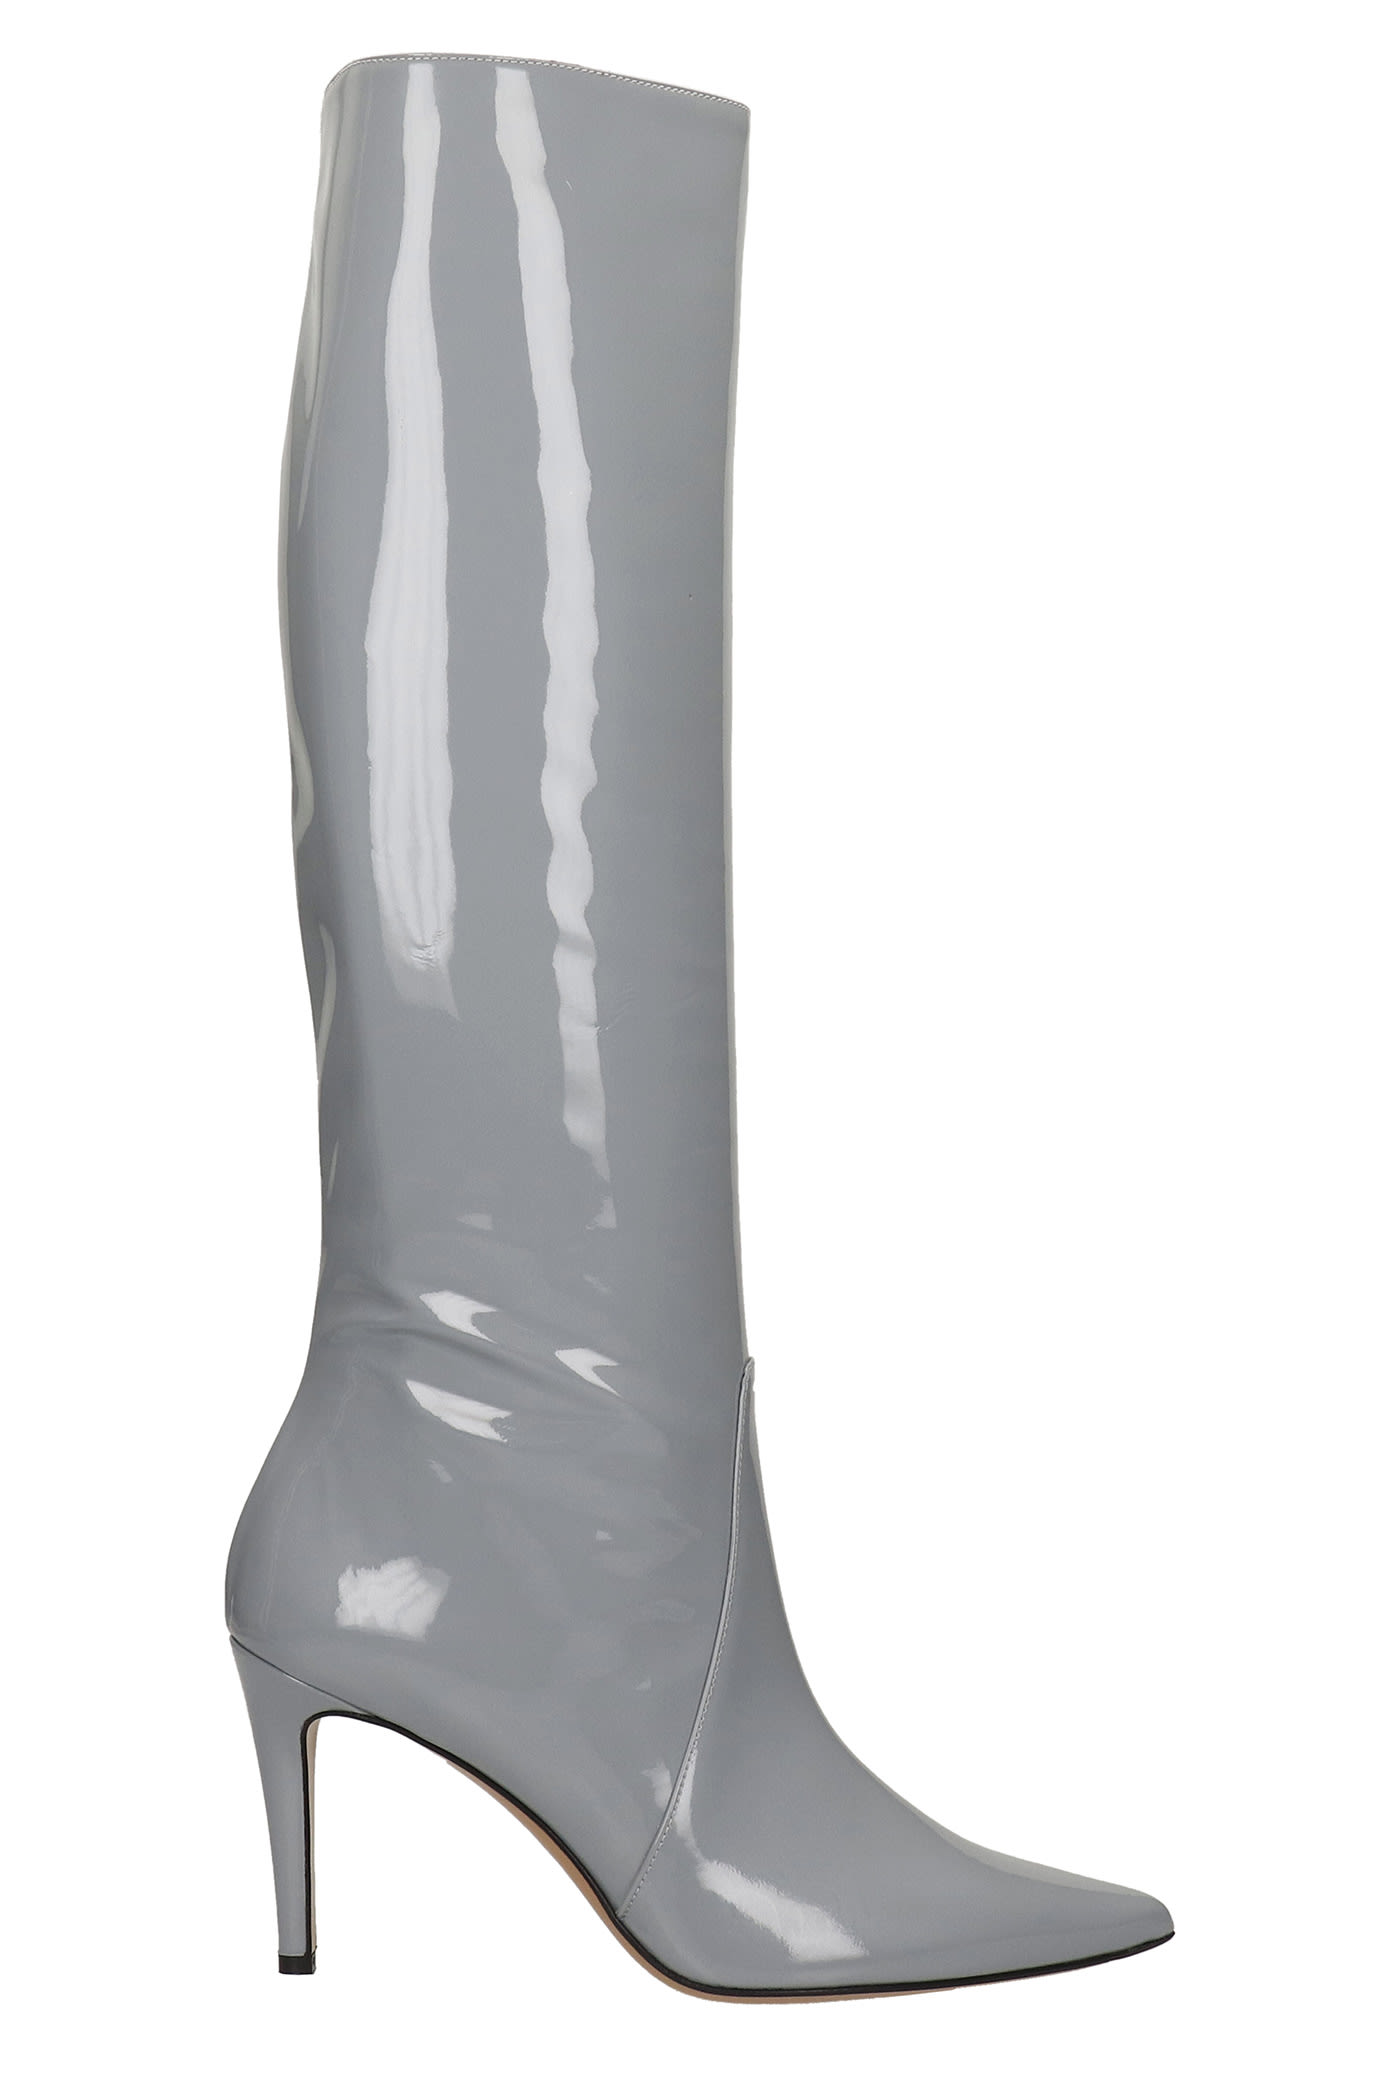 Marc Ellis Sun High Heels Boots In Grey Patent Leather